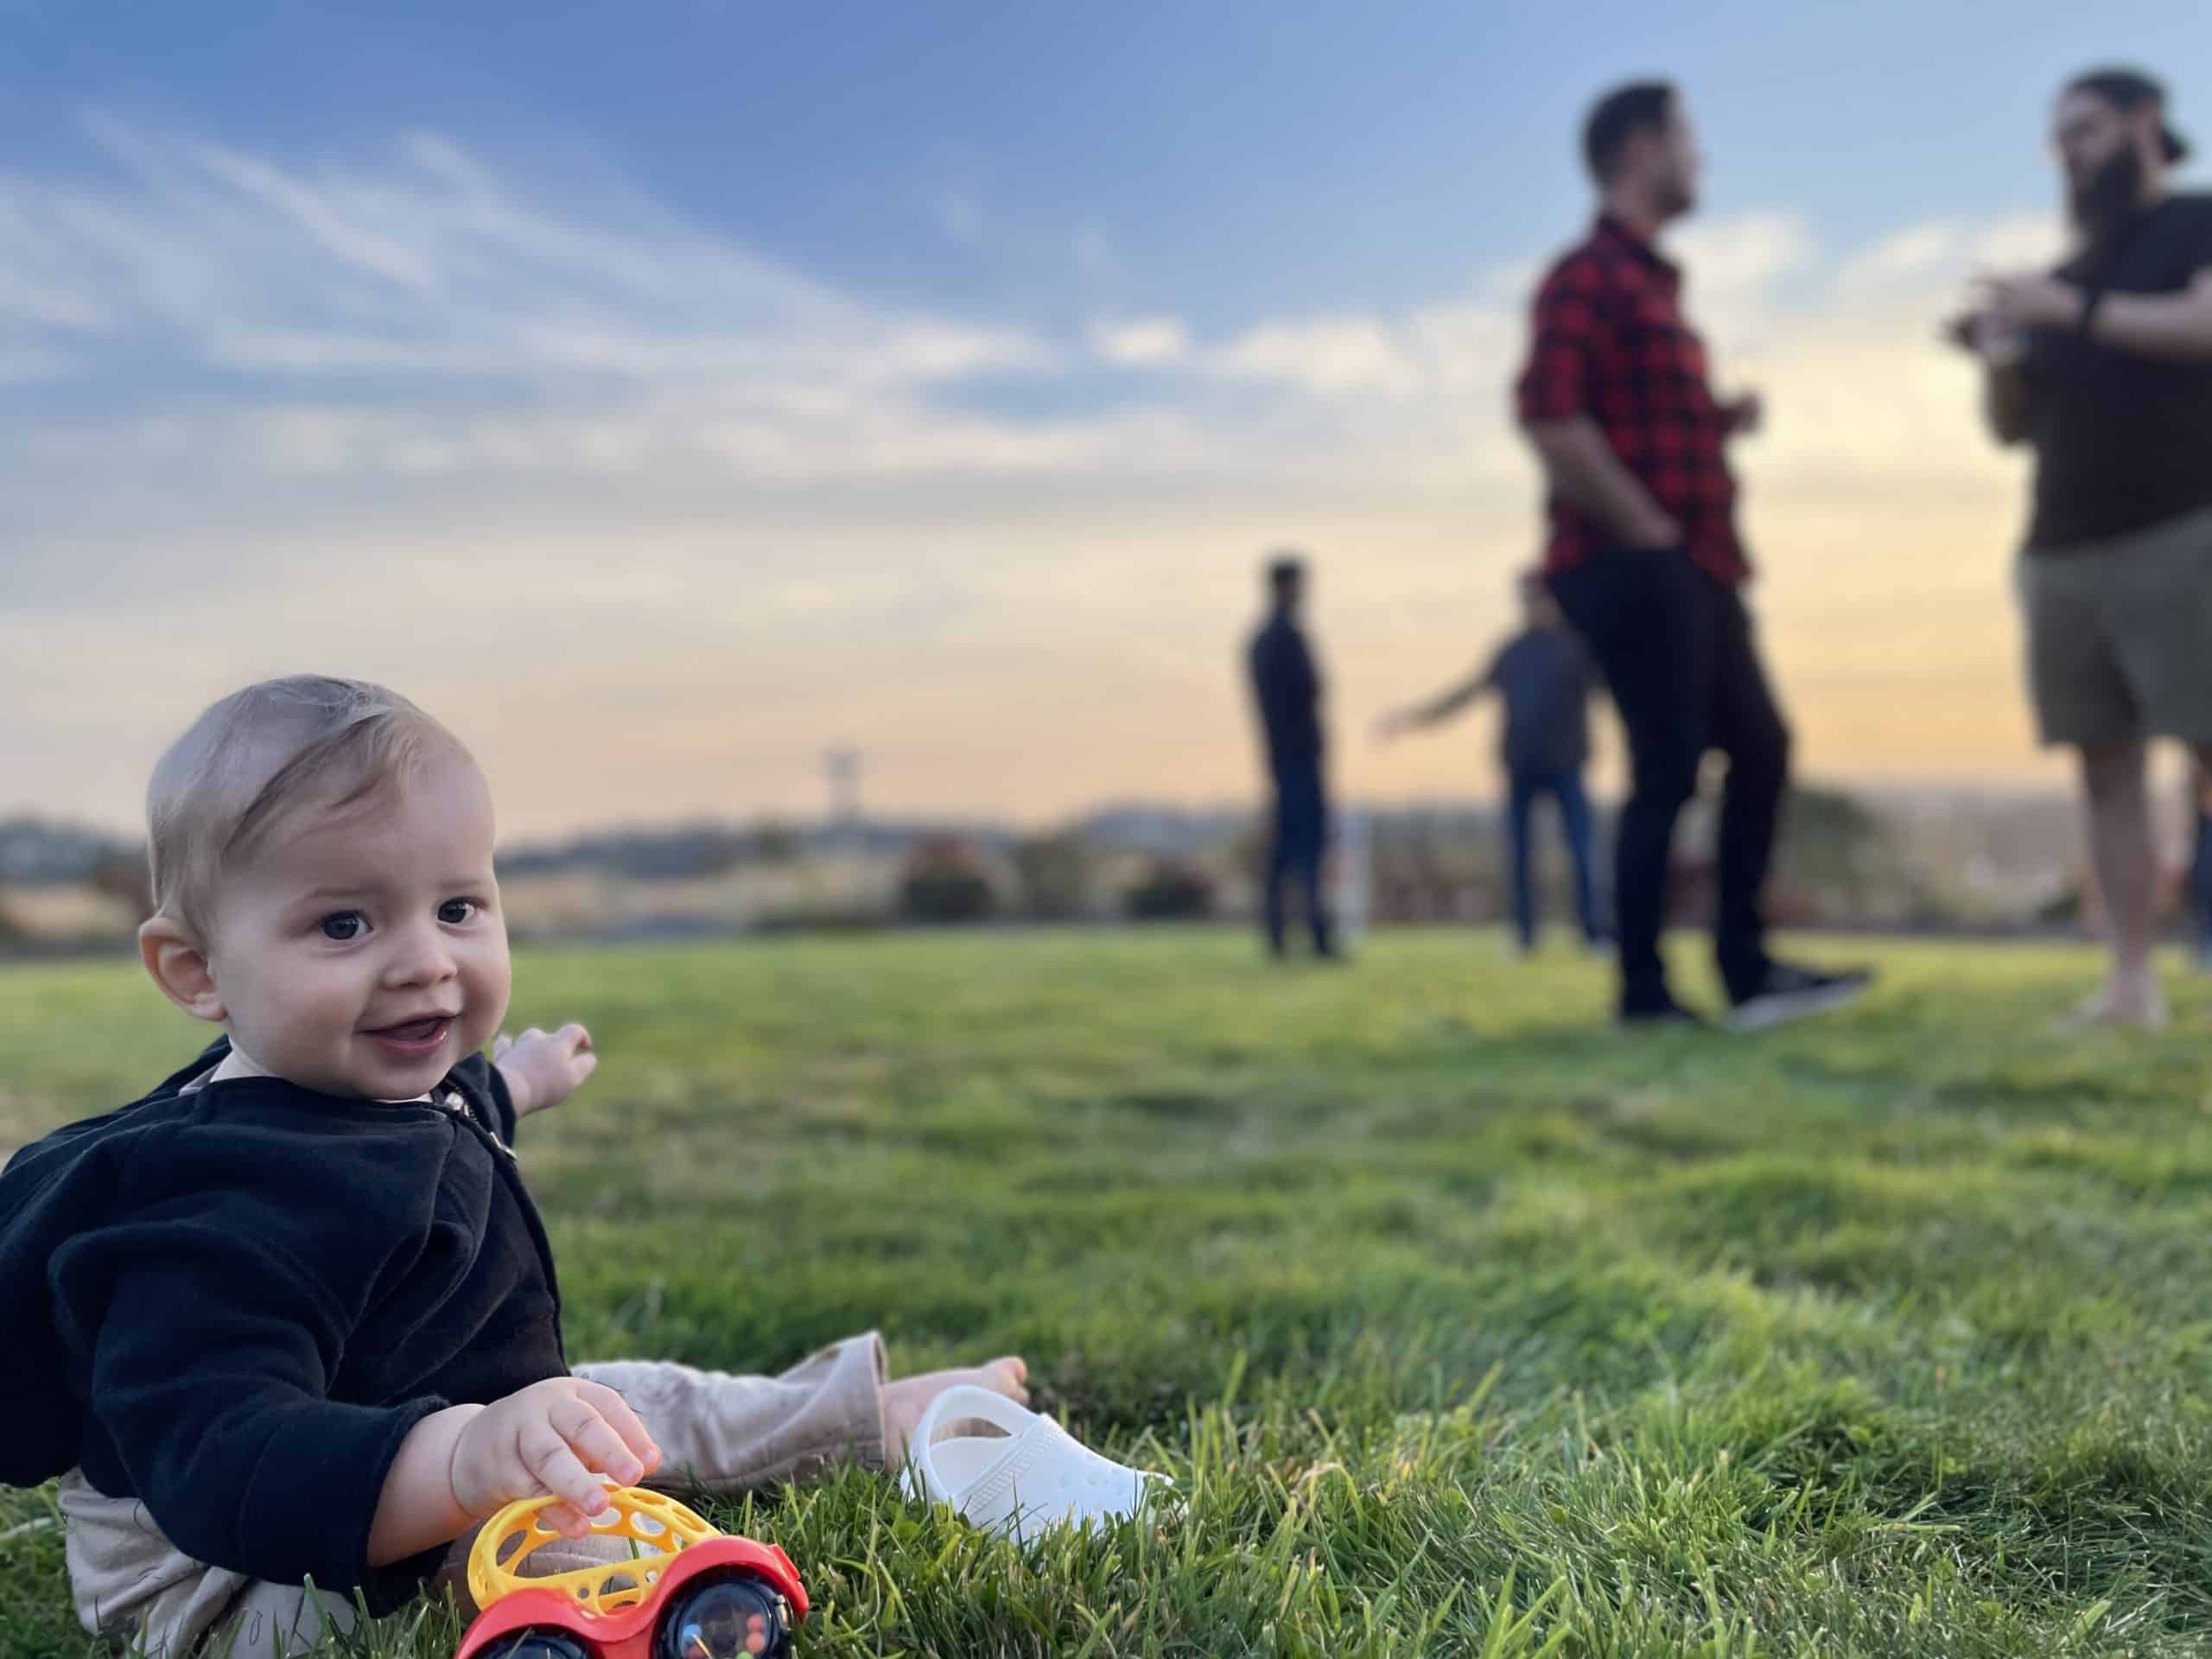 Baby Mercer plays in the grass during the 2022 TUNE retreat